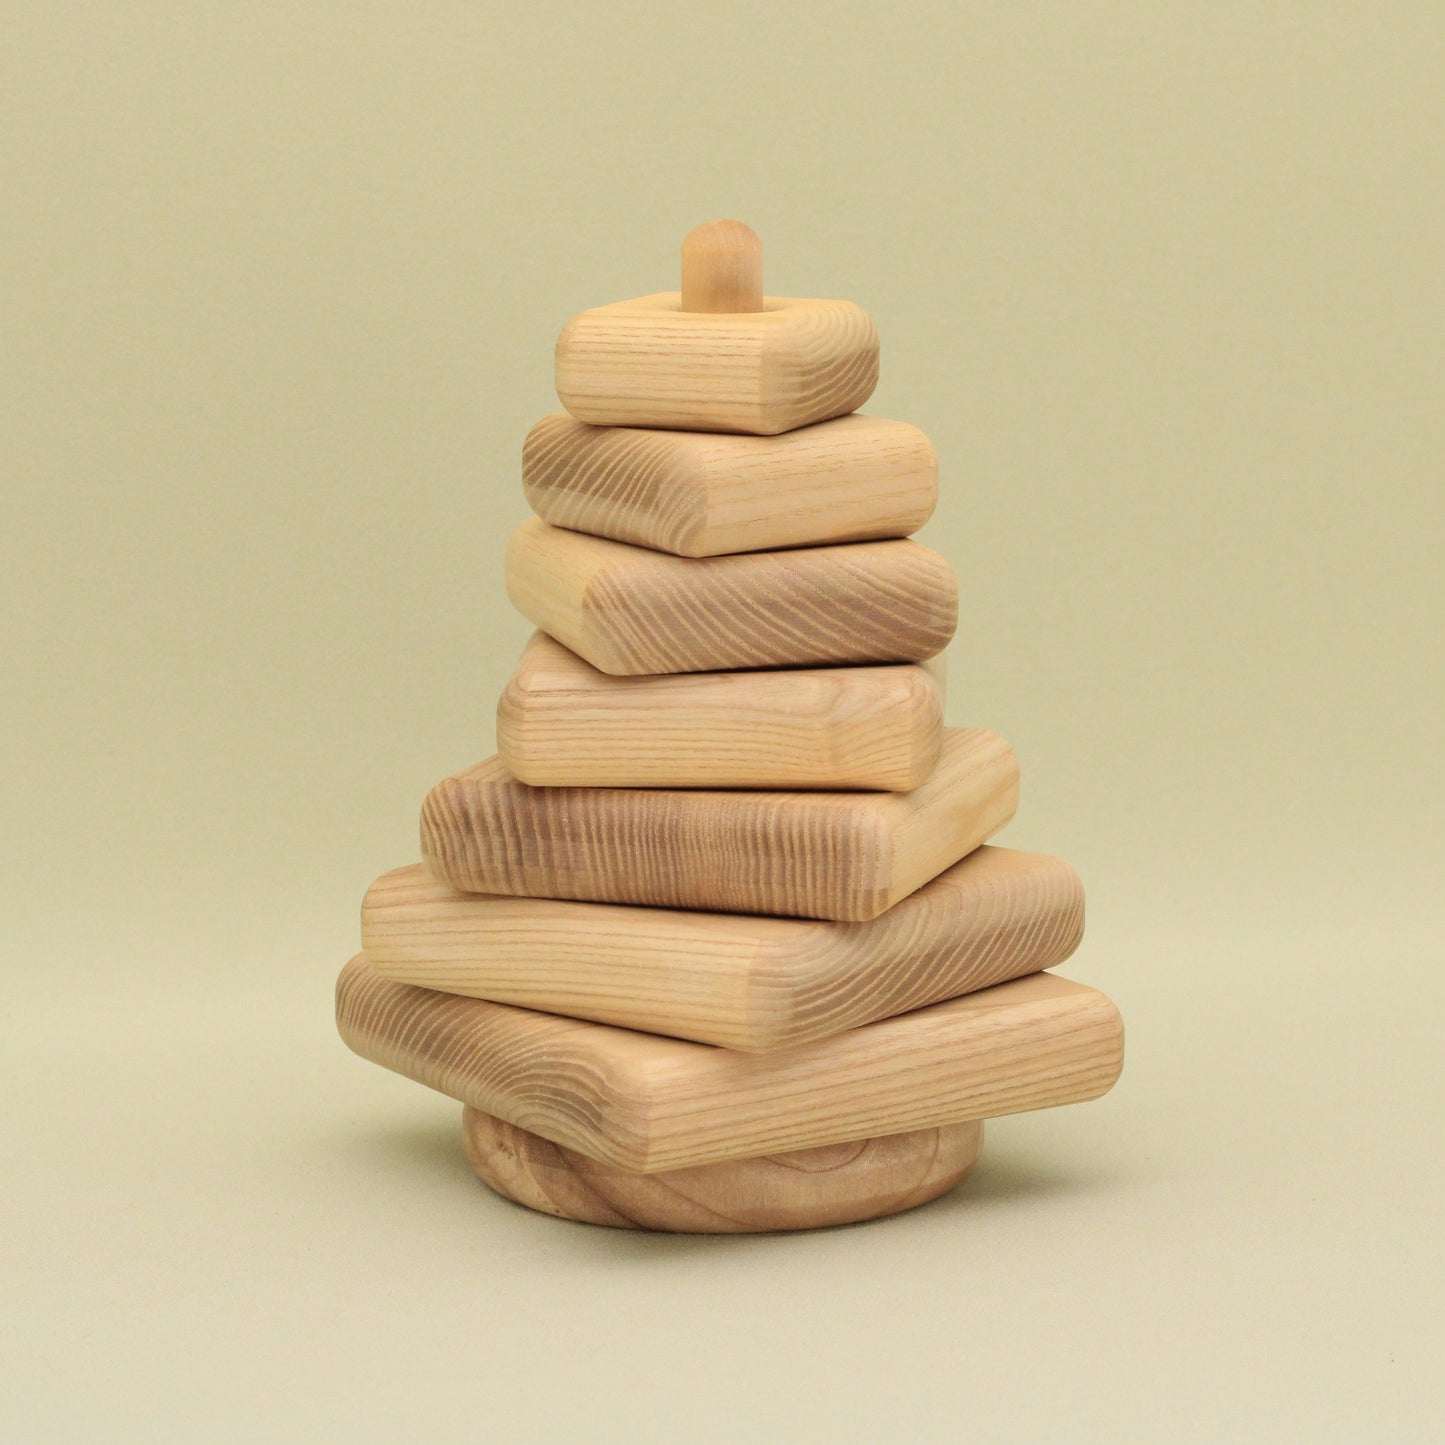 Lotes Toys Natural Square Wooden Stacking Pyramid - 7 pieces PY51